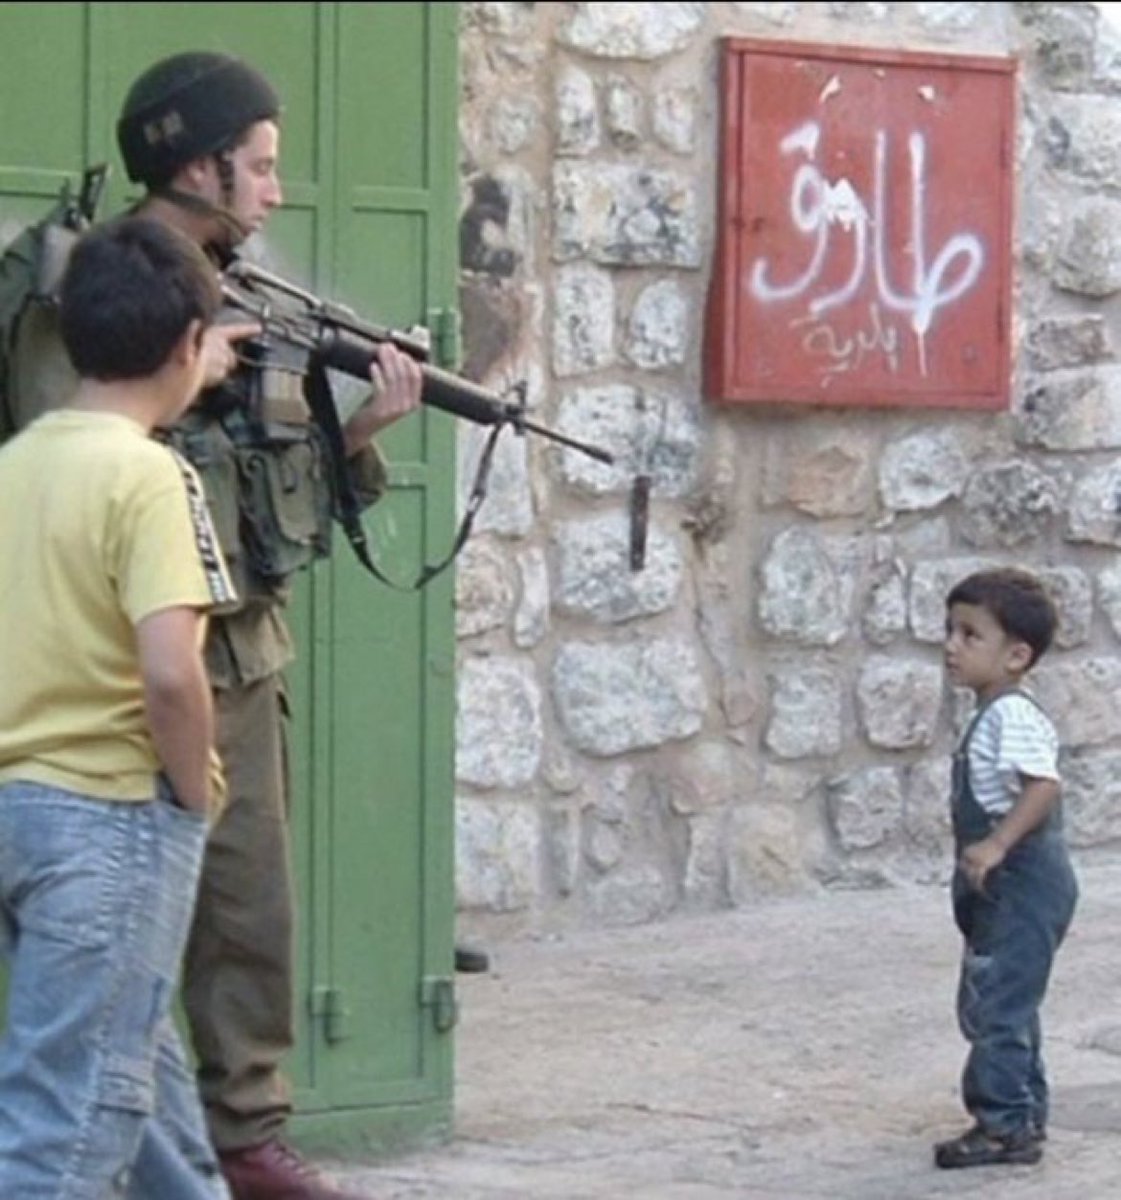 If ever a picture accurately depicted what Israel is about, this is up there! Fck that terrorist state!